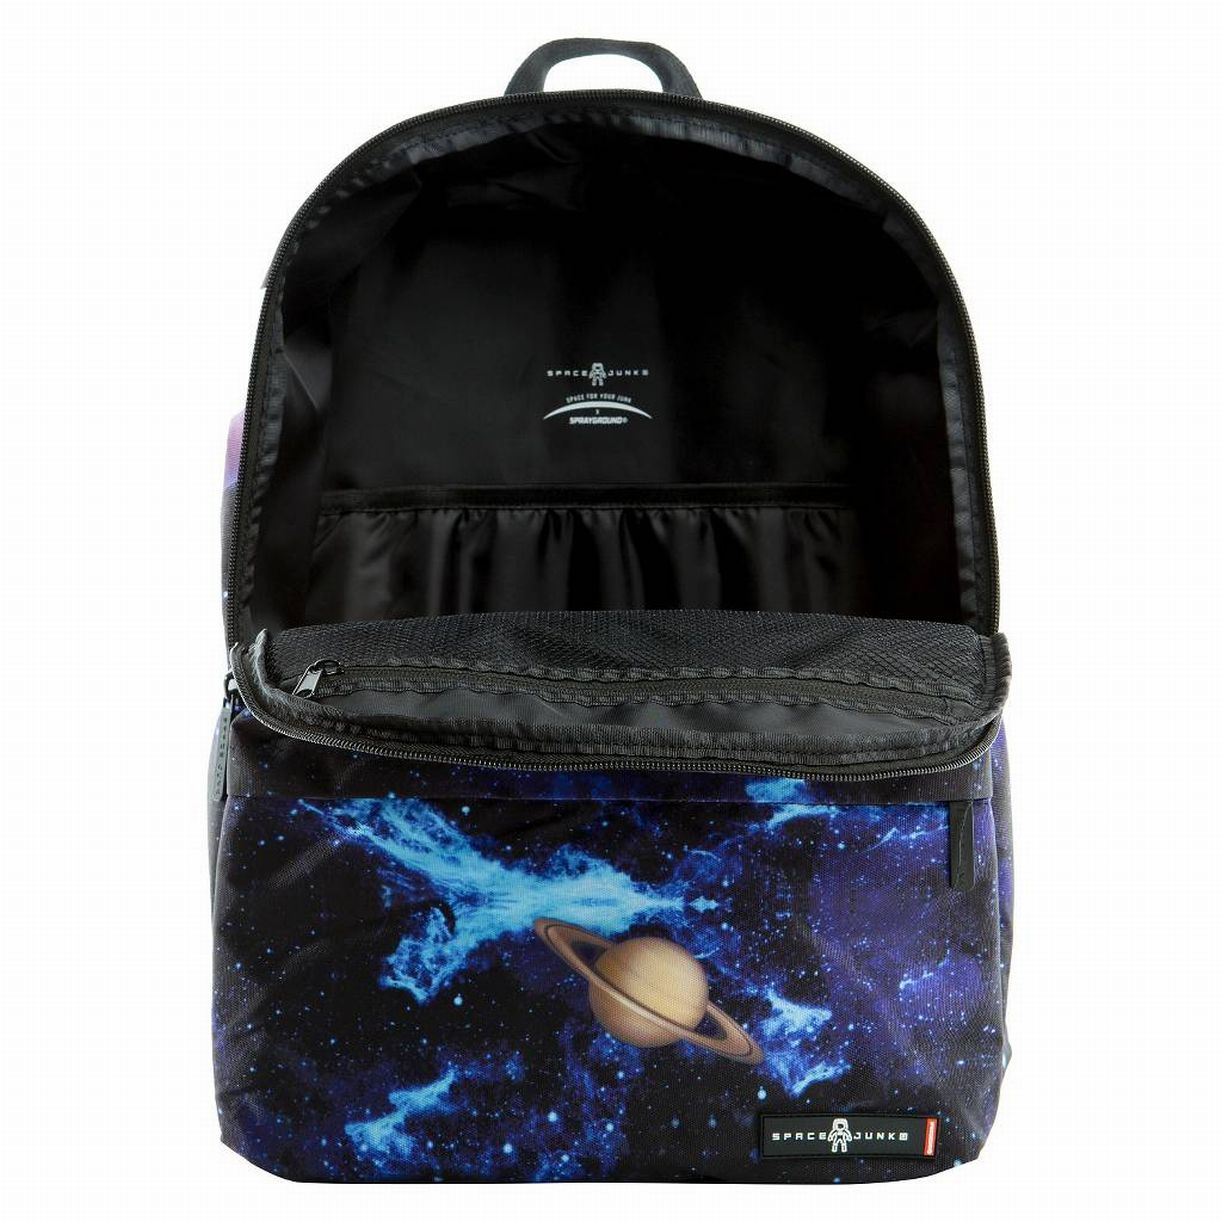 Space Junk 18.5" Astronaut Hands Blue Backpack - School Travel Pack - image 3 of 3